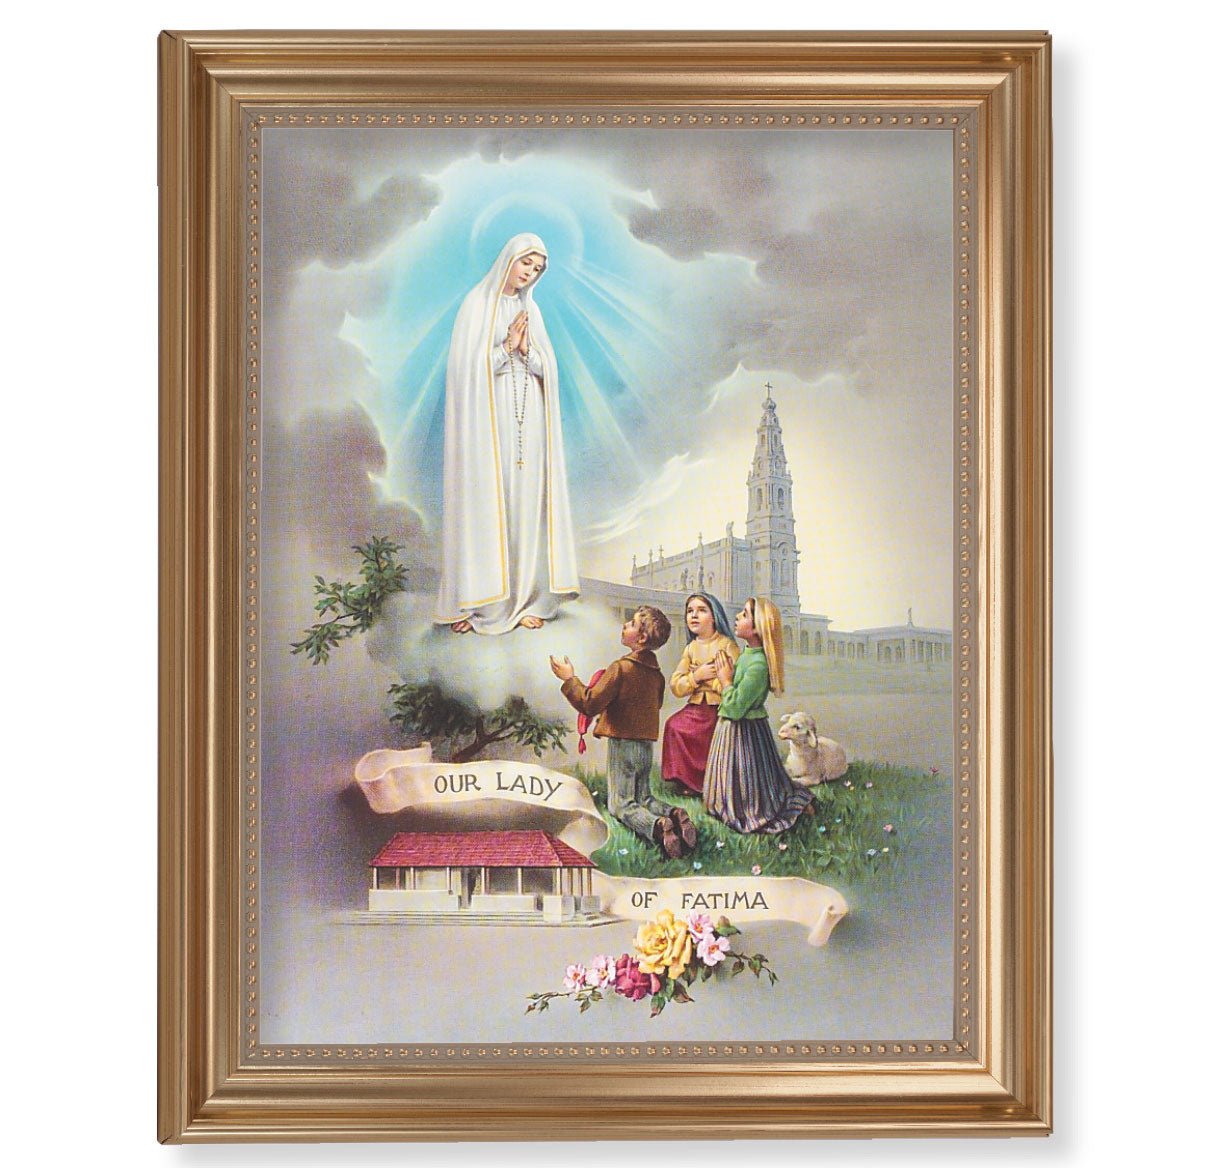 Our Lady of Fatima Gold Framed Art